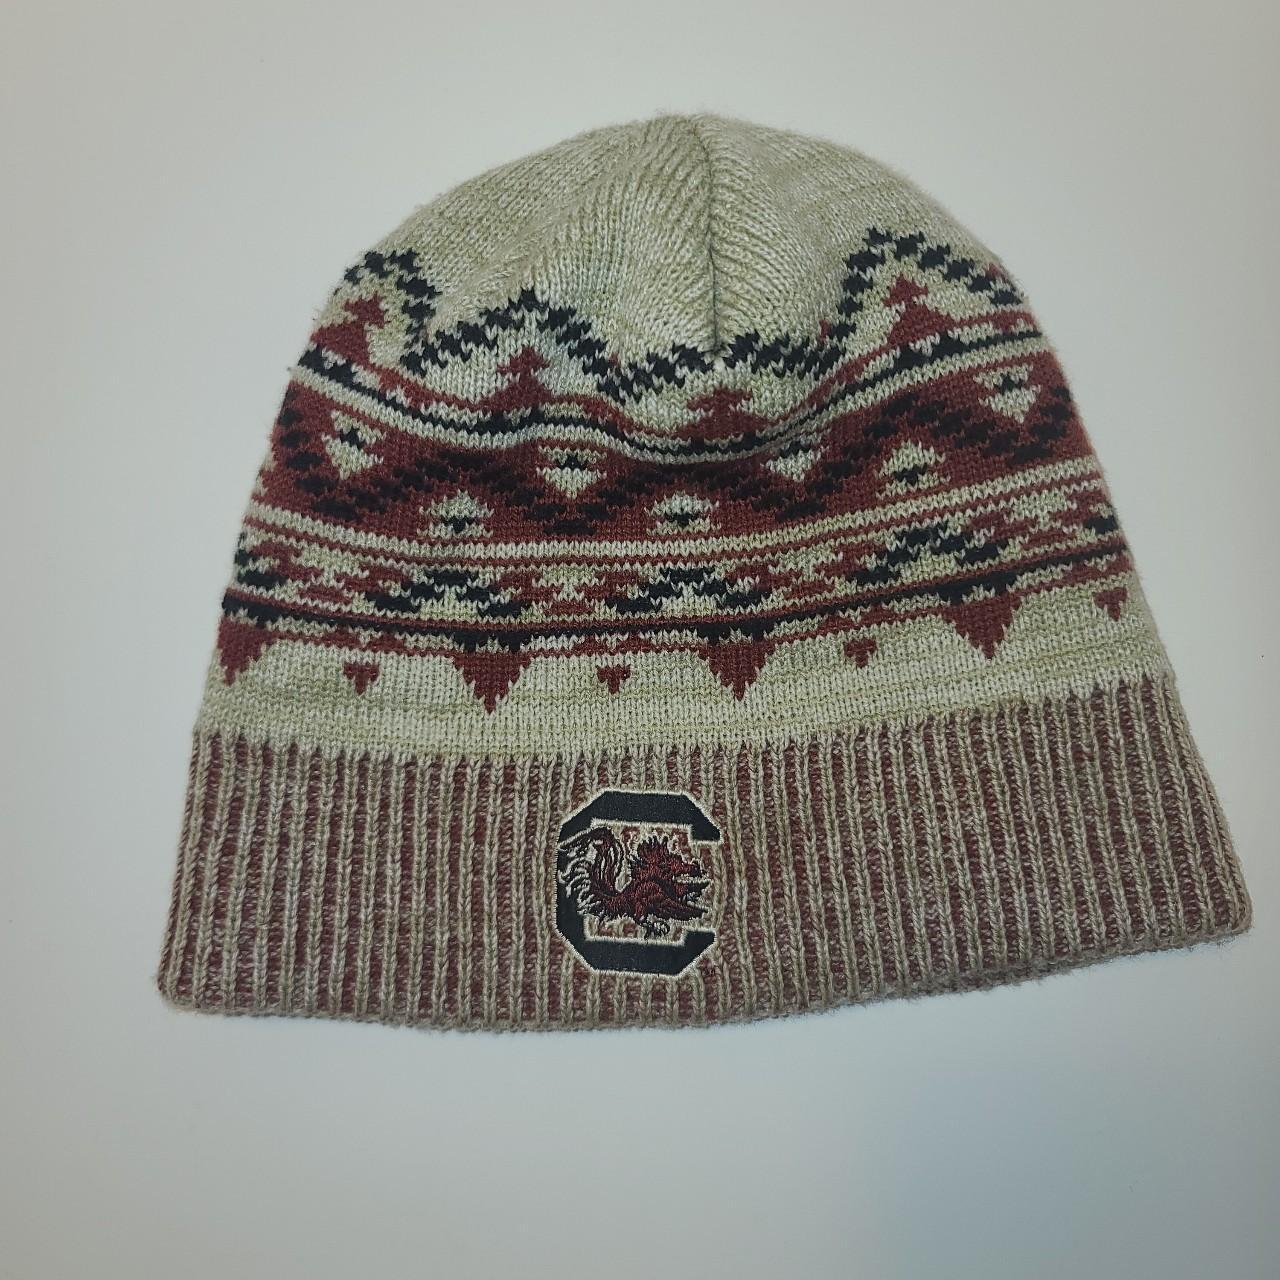 Adidas Gamecock Beanie One Sz Fits All Adults (Ts-E2) - Depop